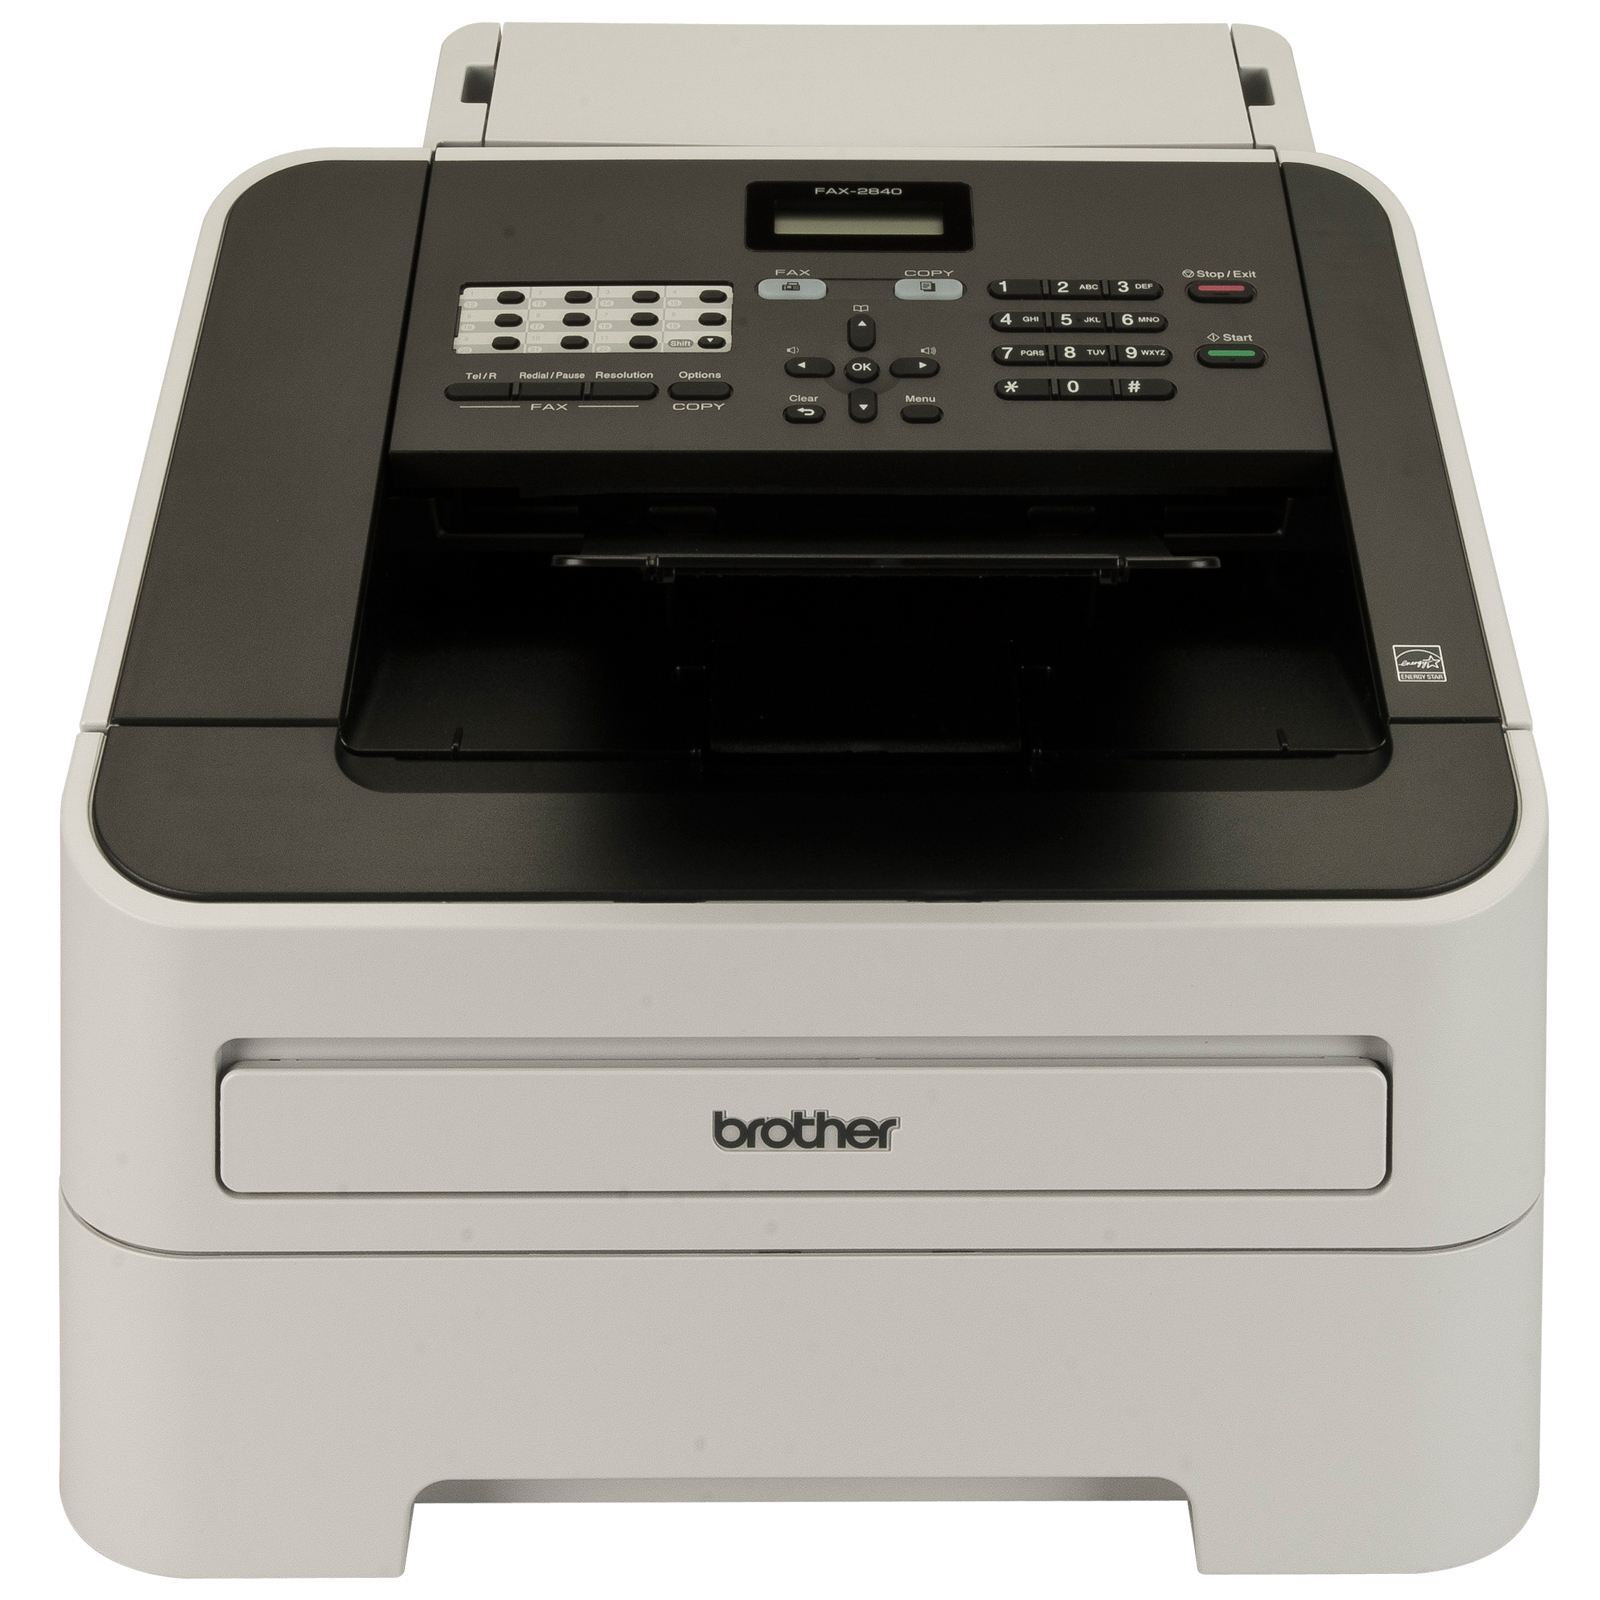 Máy fax Brother 2840 - in laser